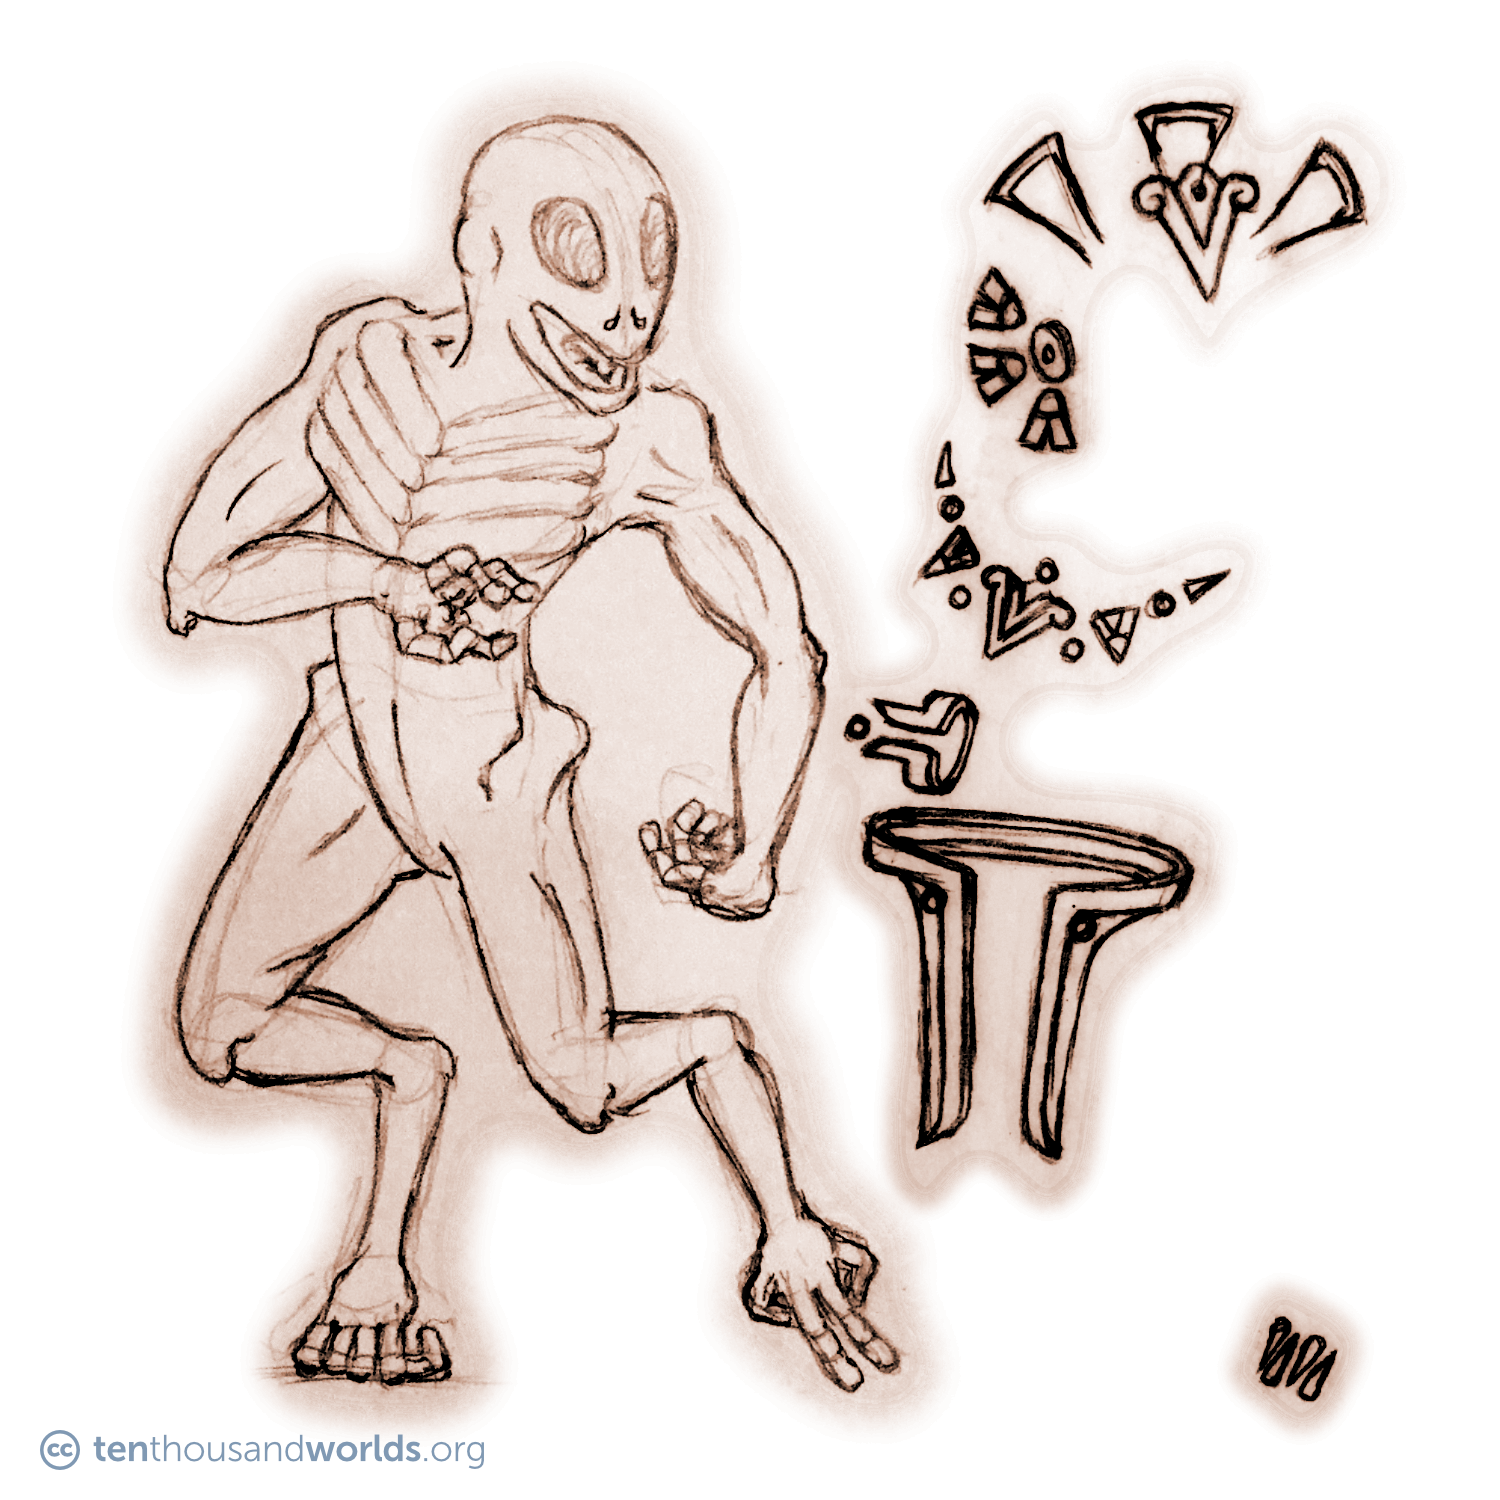 A pencil sketch of a gaunt being with large prominent ribs, legs bearing an extra joint, and a smooth, oval, almost reptilian head. Hooks poke out of its elbows and leg joints. Each limb ends in four rotating thumb-like digits. A long barbed tongue coils in its mouth. Various pieces of geometric jewelry and ornamental float nearby.